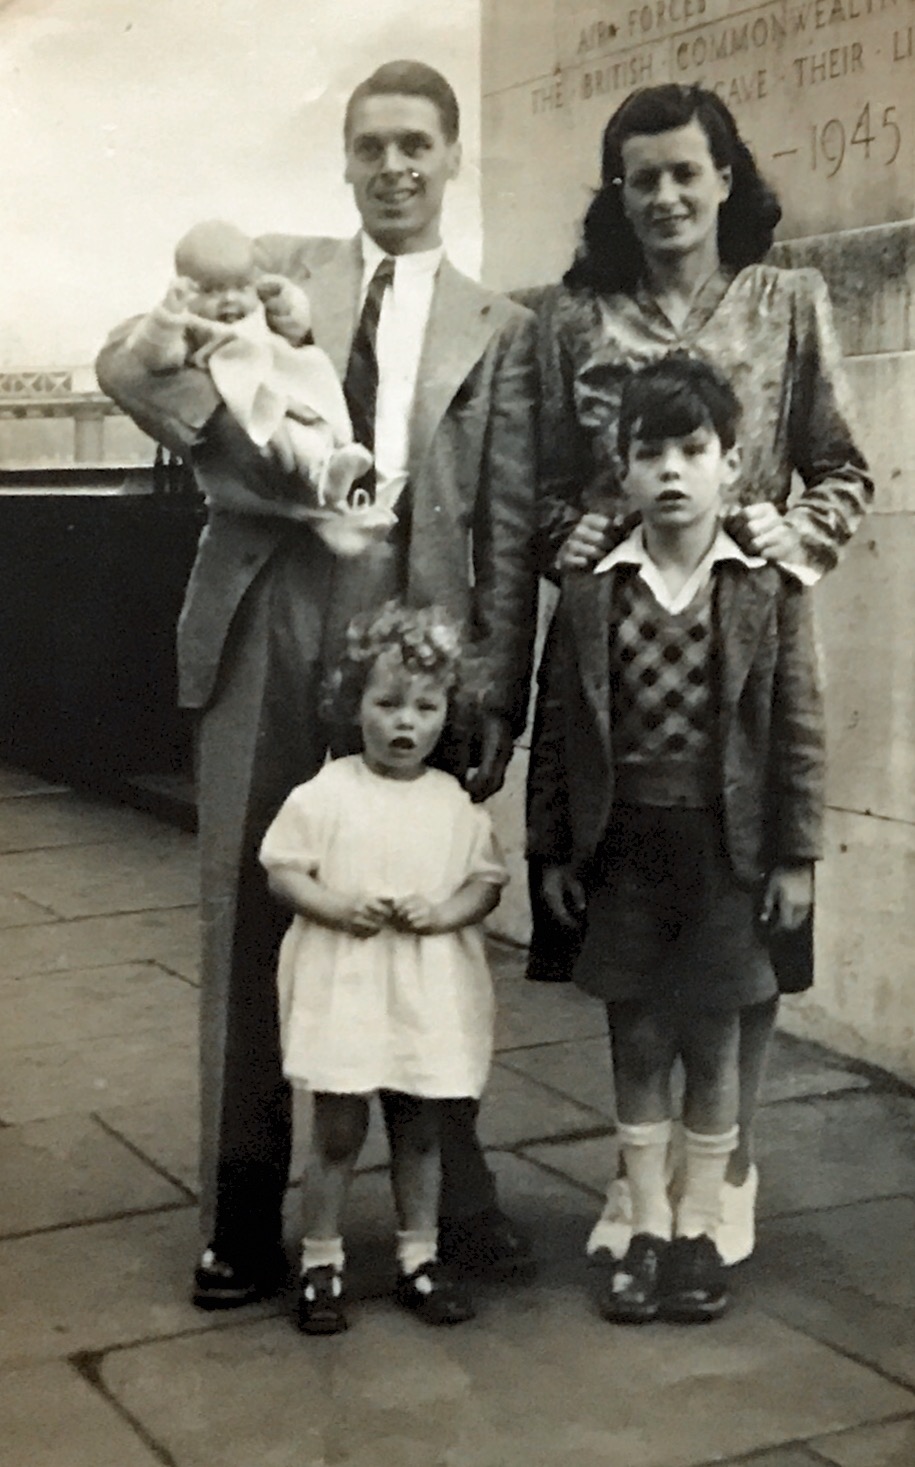 I think this is  a picture of our family departing London in 1948 for a new life in Australia